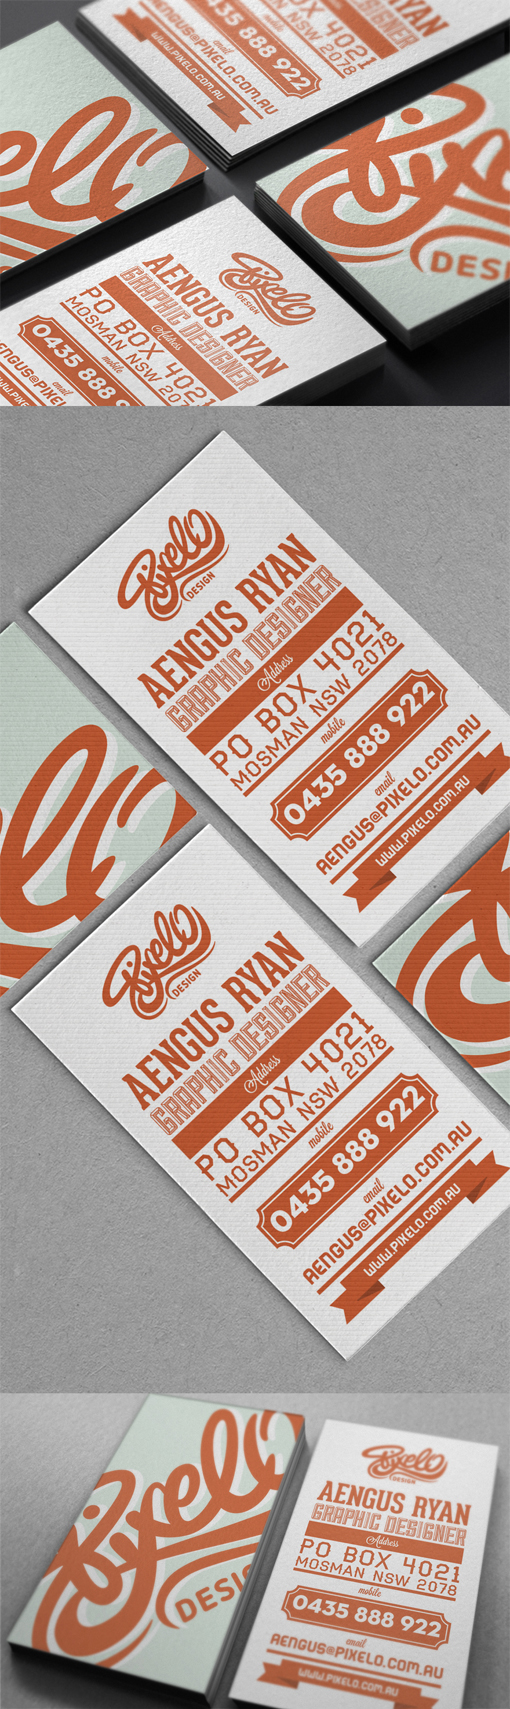 Creative Typography Business Card Design For A Graphic Designer